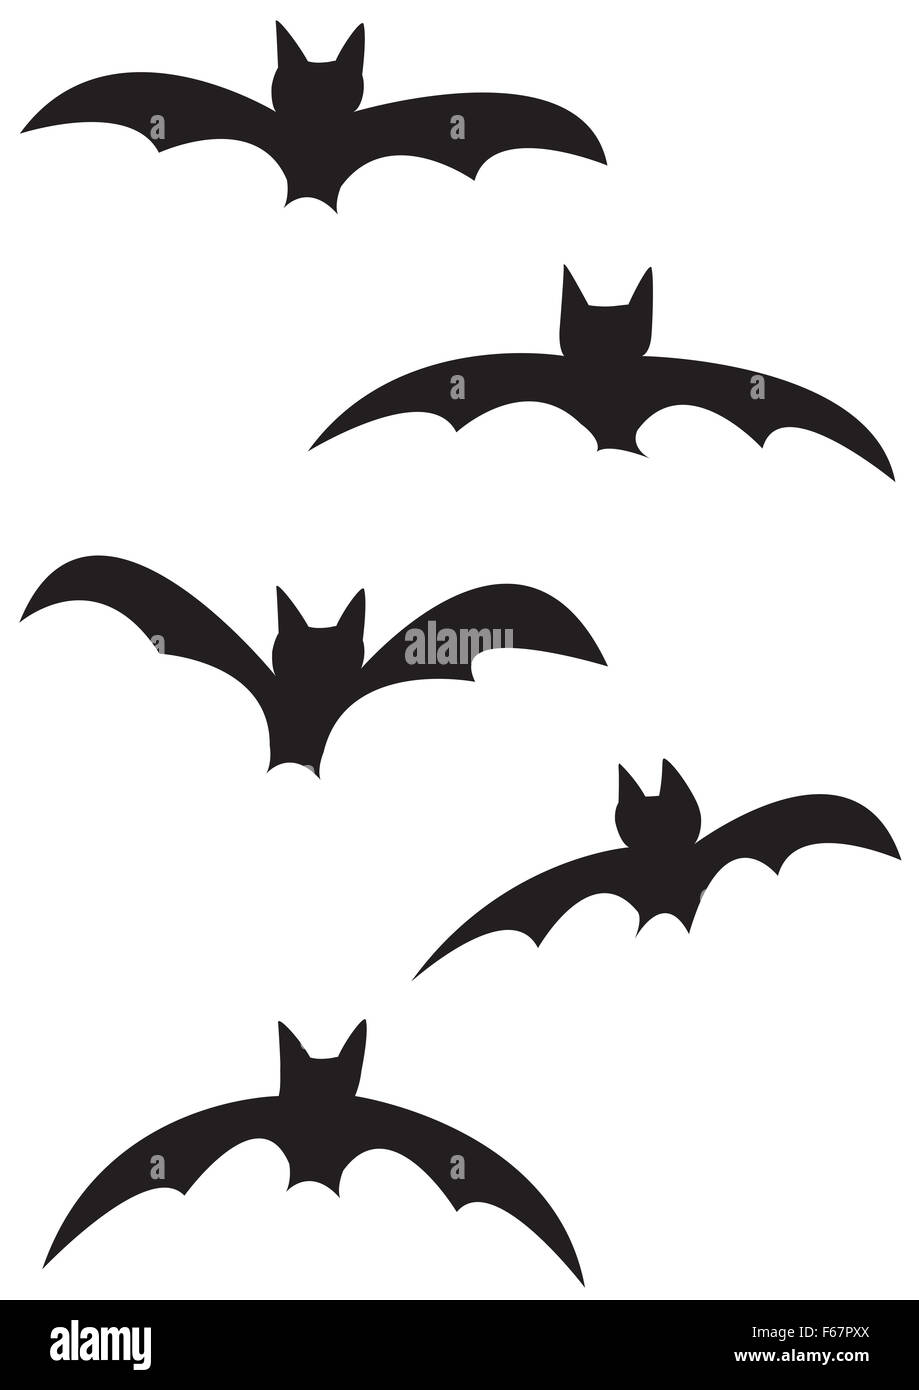 5 different bat silhouettes isolated on a white background Stock Photo